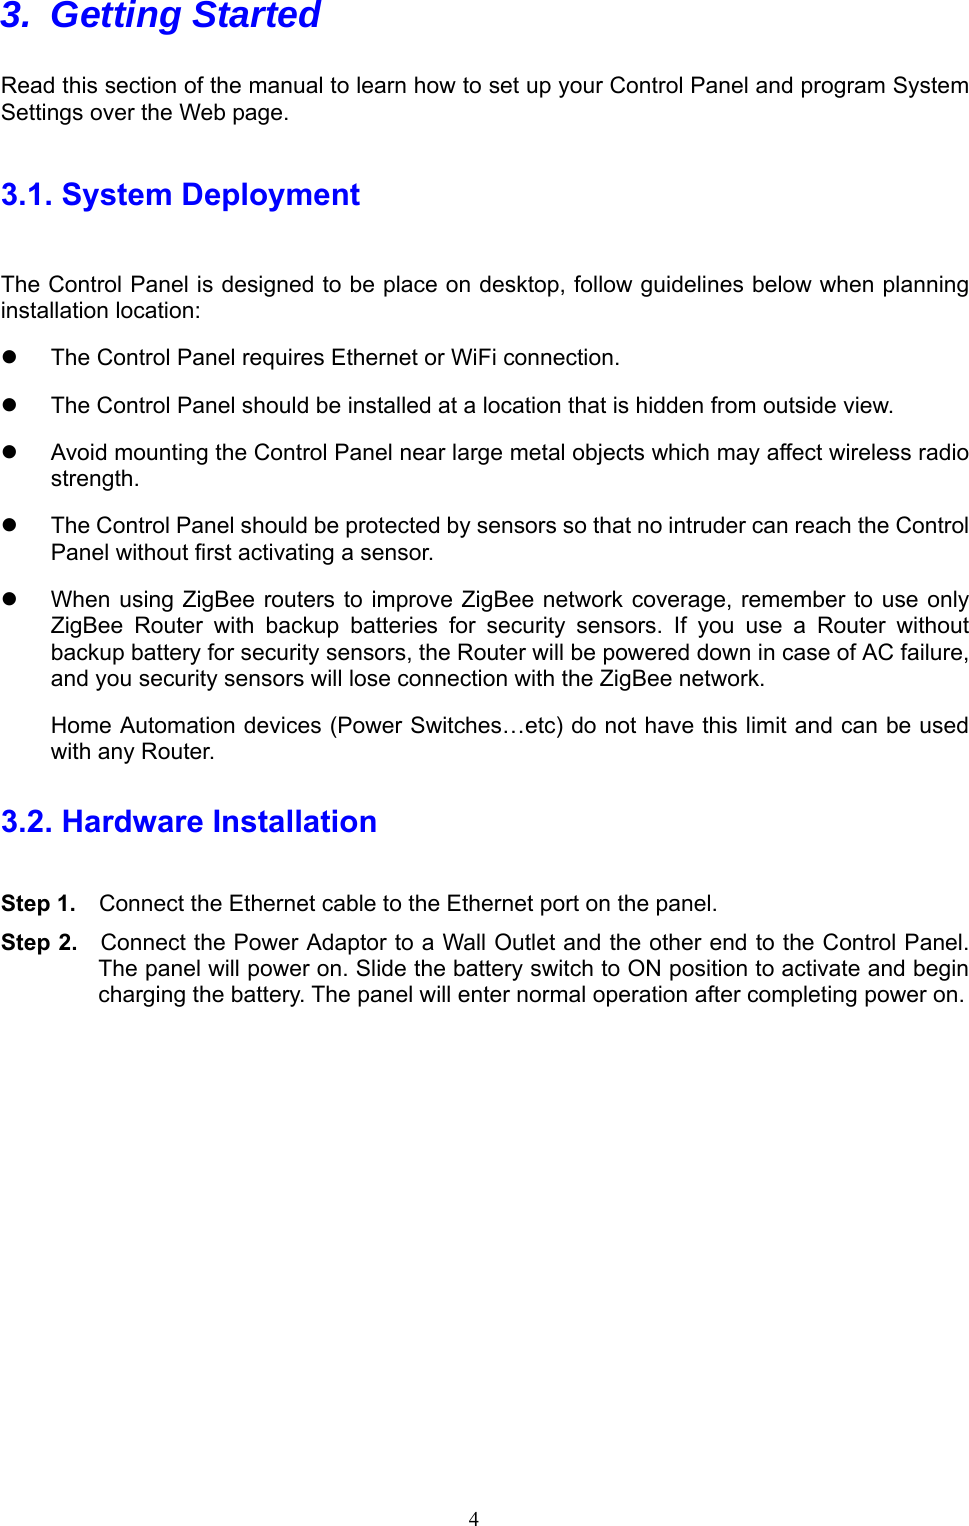  4 3. Getting Started   Read this section of the manual to learn how to set up your Control Panel and program System Settings over the Web page.   3.1. System Deployment The Control Panel is designed to be place on desktop, follow guidelines below when planning installation location:   The Control Panel requires Ethernet or WiFi connection.   The Control Panel should be installed at a location that is hidden from outside view.   Avoid mounting the Control Panel near large metal objects which may affect wireless radio strength.   The Control Panel should be protected by sensors so that no intruder can reach the Control Panel without first activating a sensor.   When using ZigBee routers to improve ZigBee network coverage,  remember to  use only ZigBee  Router  with  backup  batteries  for  security  sensors.  If  you  use  a  Router  without backup battery for security sensors, the Router will be powered down in case of AC failure, and you security sensors will lose connection with the ZigBee network. Home Automation devices (Power Switches…etc) do not have this limit and can be used with any Router. 3.2. Hardware Installation Step 1.    Connect the Ethernet cable to the Ethernet port on the panel.  Step 2.    Connect the Power Adaptor to a Wall Outlet and the other end to the Control Panel. The panel will power on. Slide the battery switch to ON position to activate and begin charging the battery. The panel will enter normal operation after completing power on.          